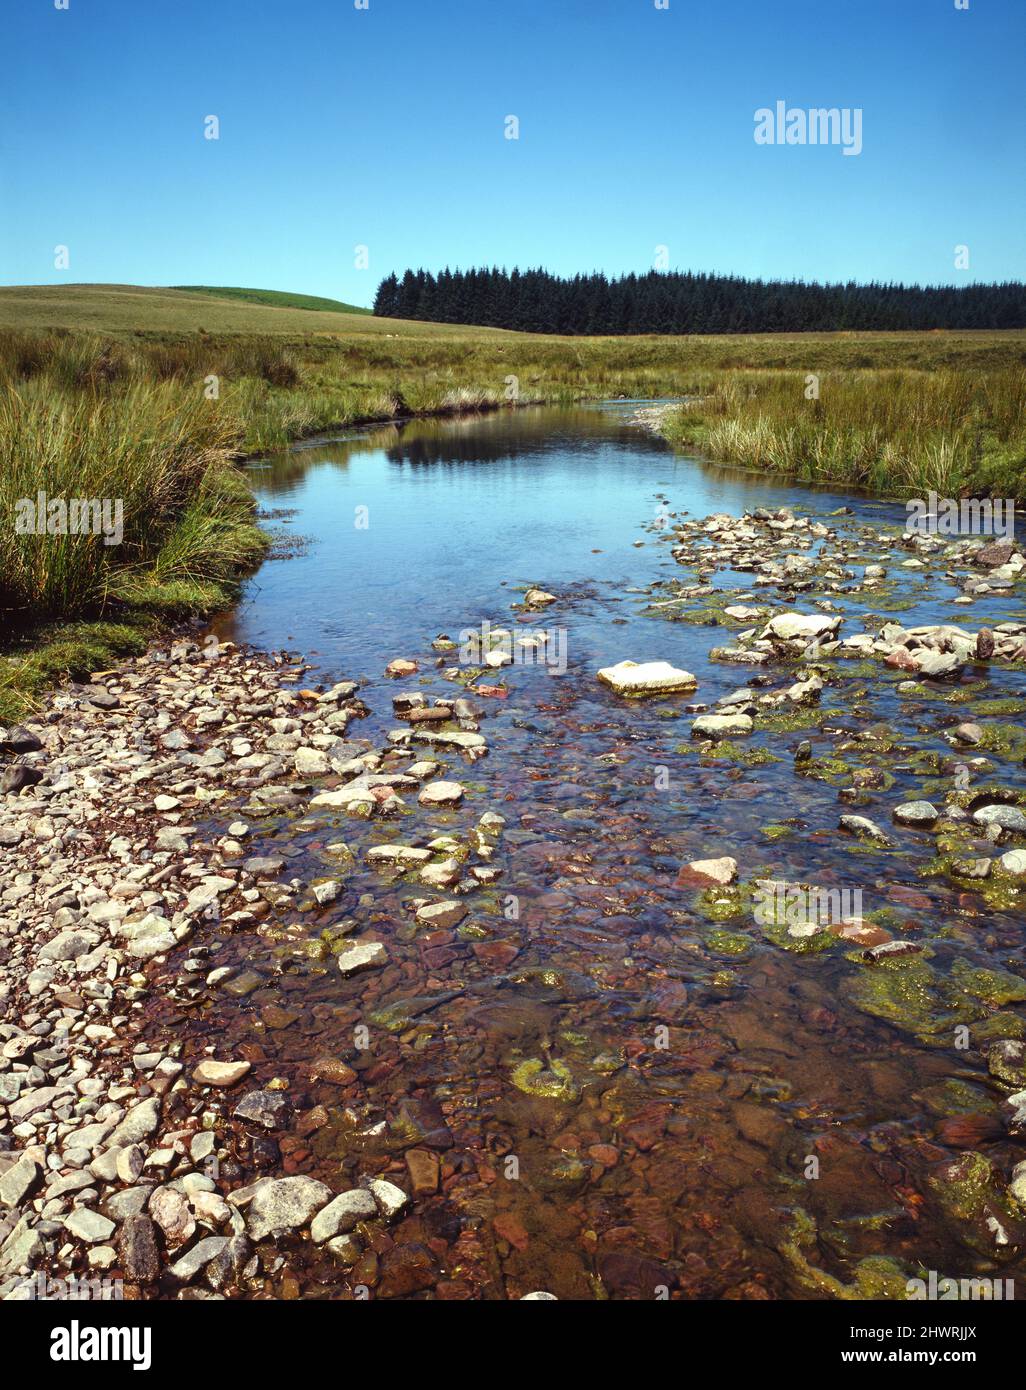 Clear clean mountain stream Afon Senni  with rocks in water blue sky forest in background copy space grass portrait format Heol Senni  Powys Wales UK Stock Photo